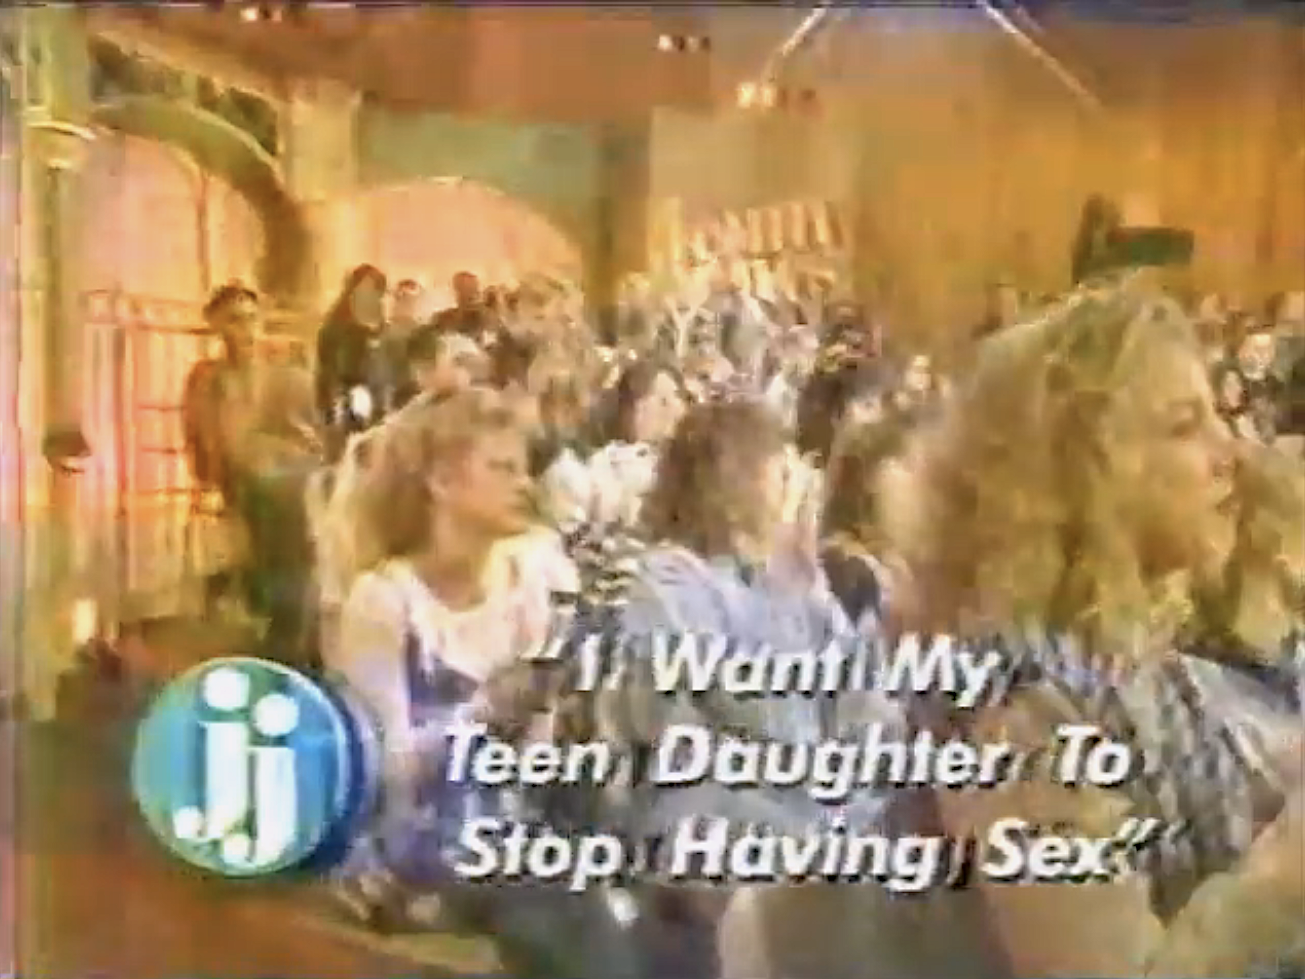 &quot;I want my teen daughter to stop having sex&quot;